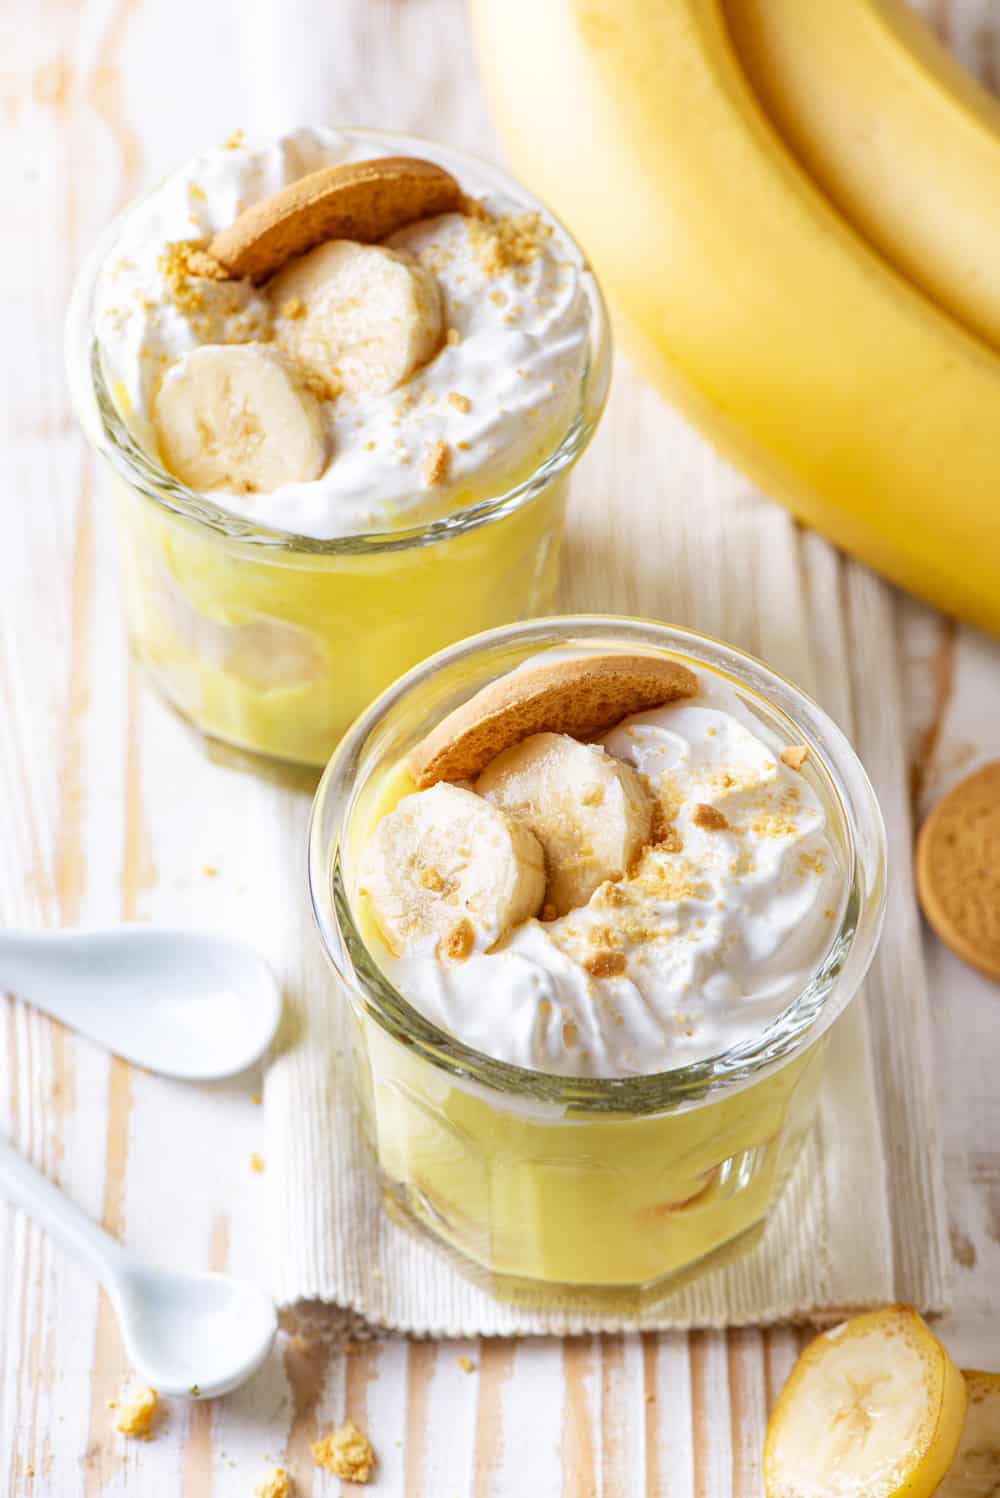 Two glass cups, one in front of the other, filled with vegan banana pudding. Each cup has vegan whipped cream, sliced bananas, and a vanilla cookie on top. The front cup is on a cloth and everything is on a wood table.